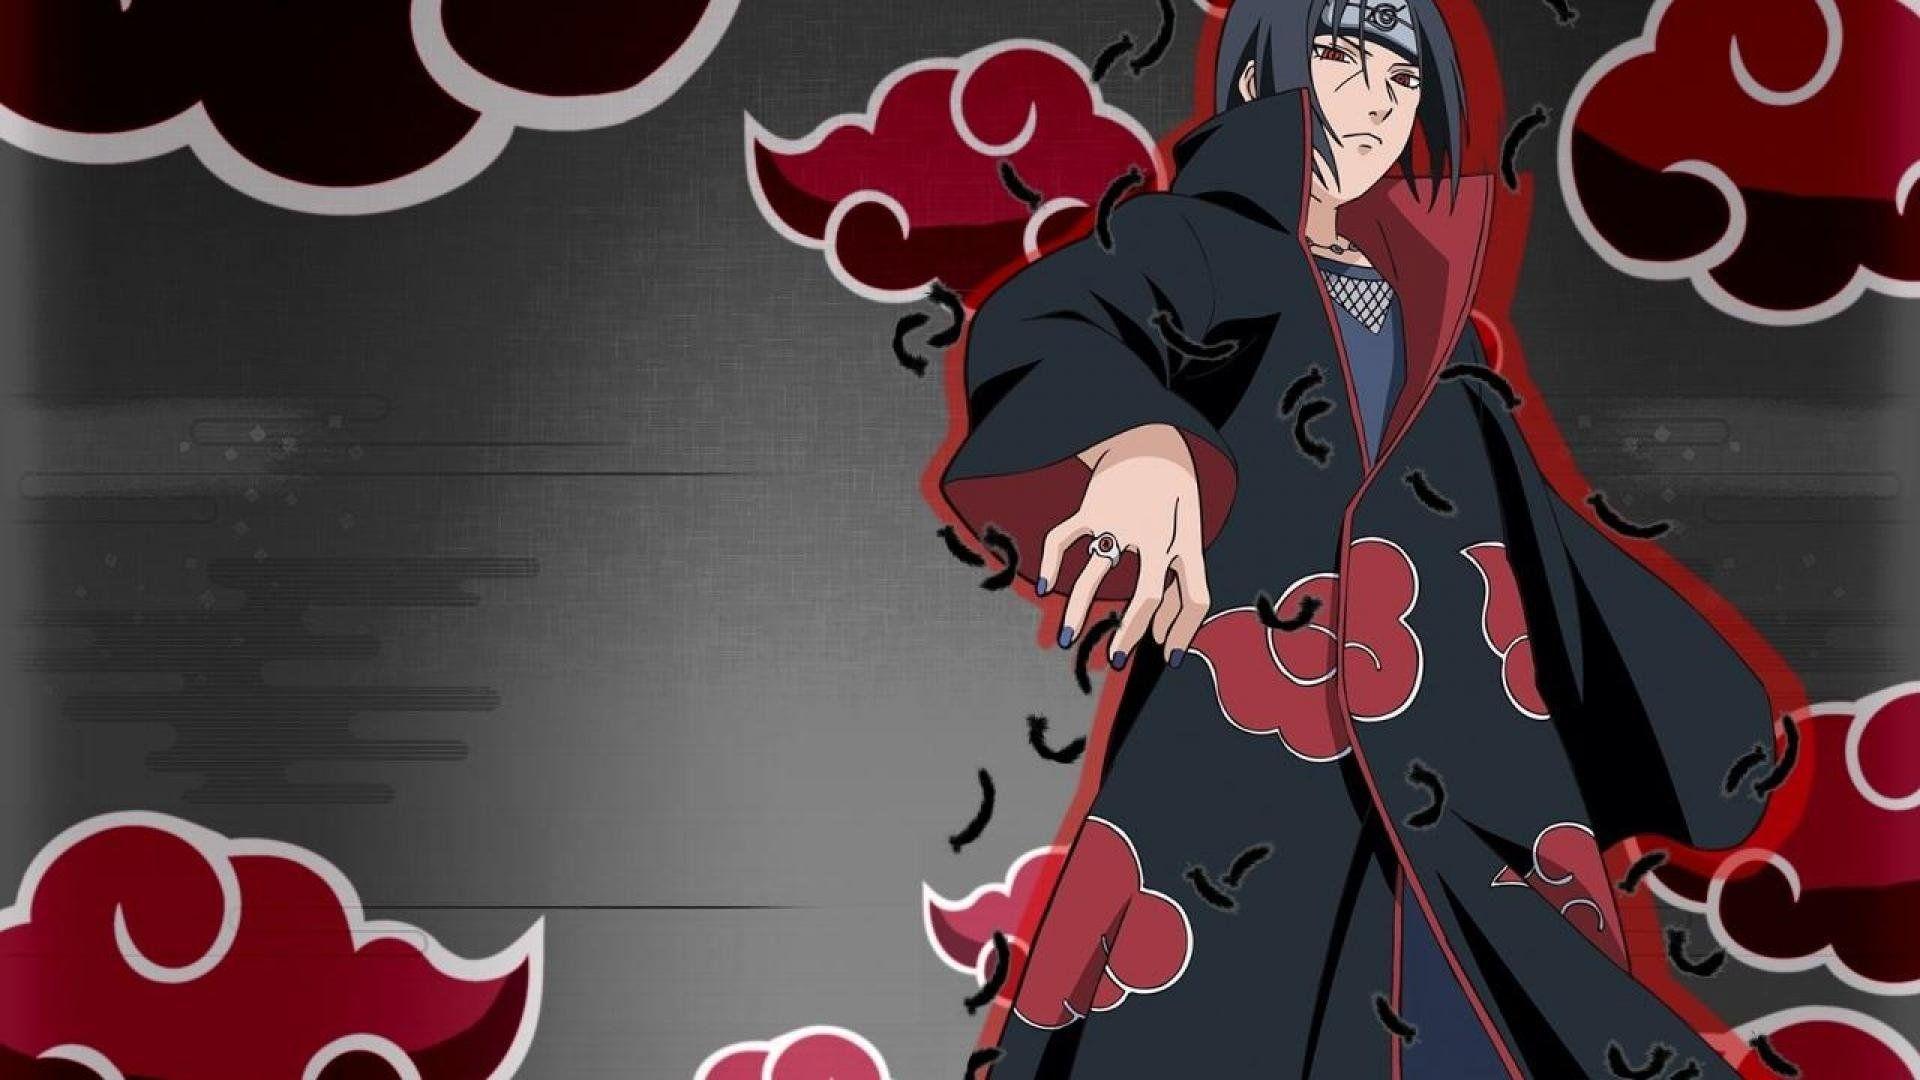 Itachi Background for Computer. Computer Wallpaper, Beautiful Computer Wallpaper and Cute Computer Wallpaper